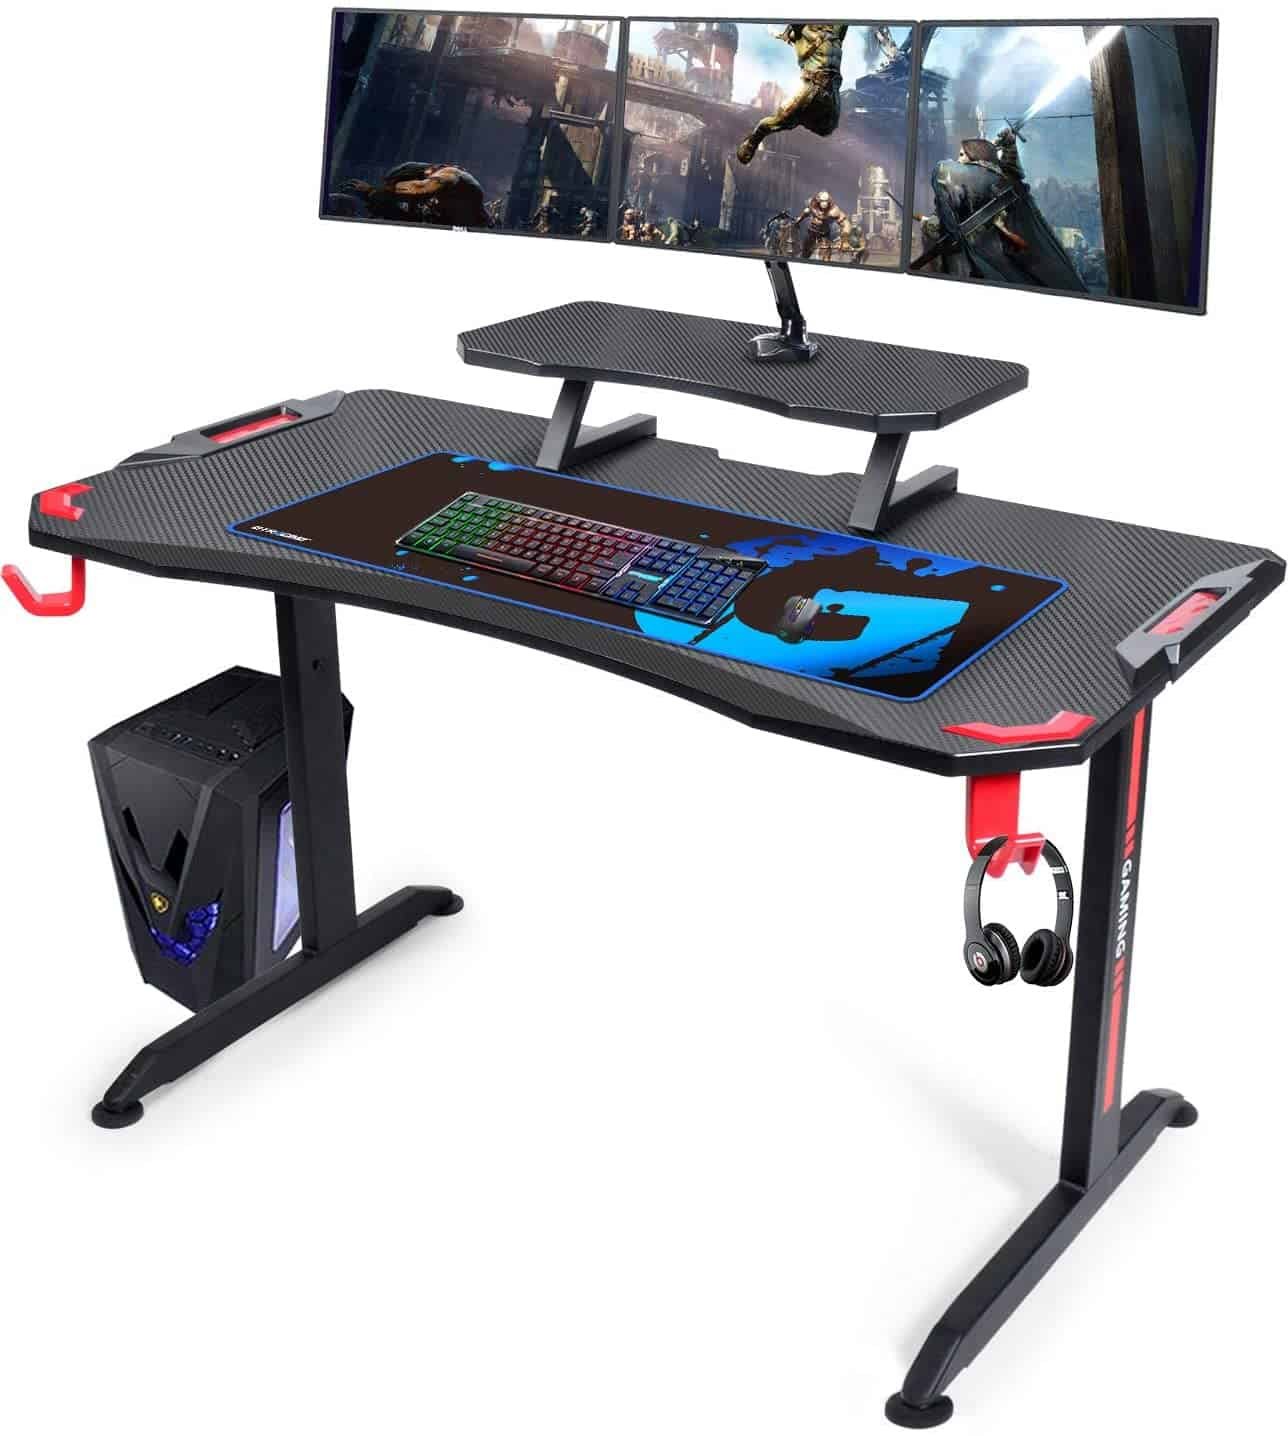 Simple Best Budget Gaming Computer Desk for Small Room